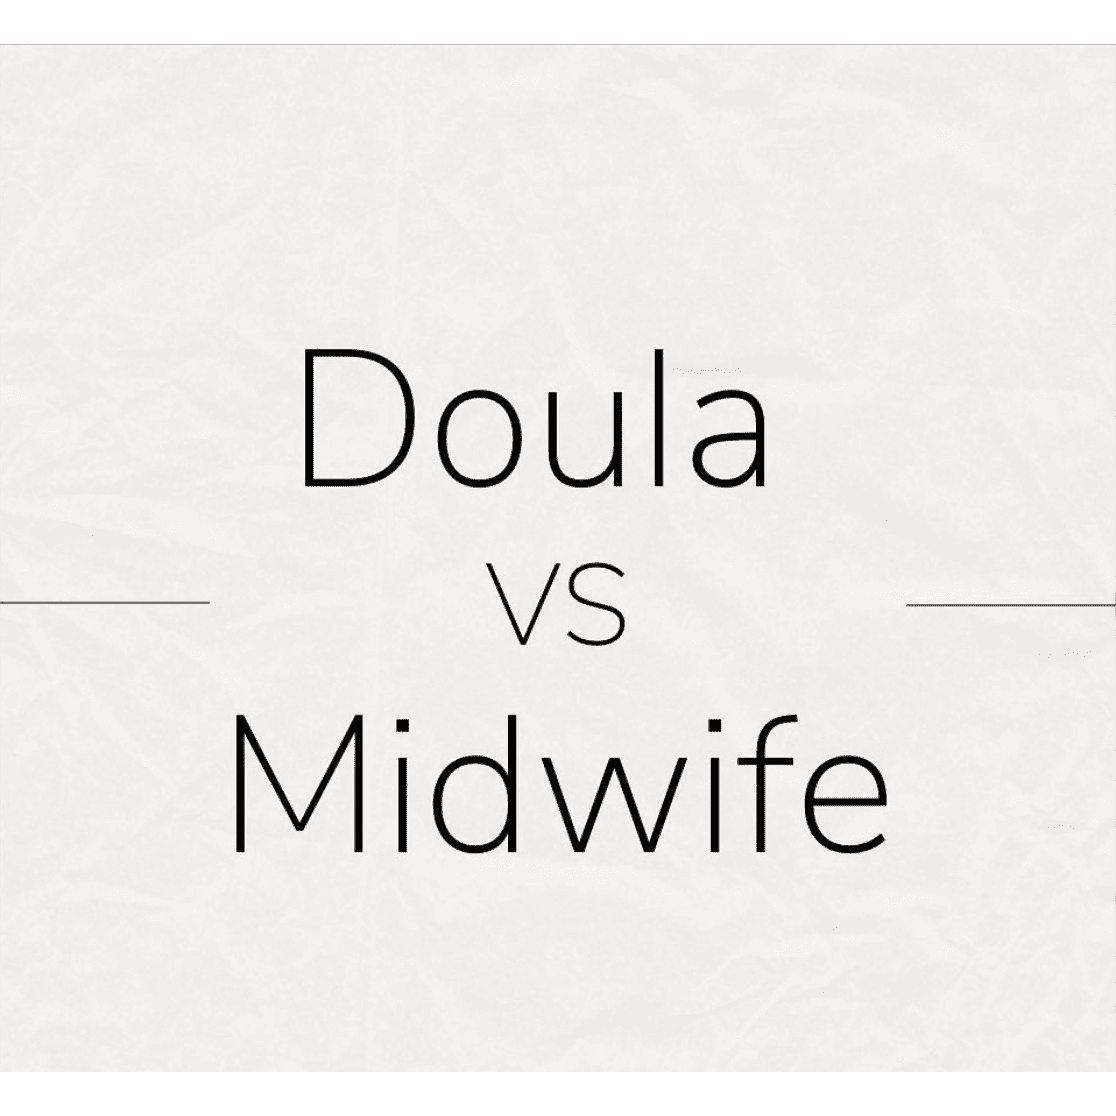 Are Doulas and Midwives the same?